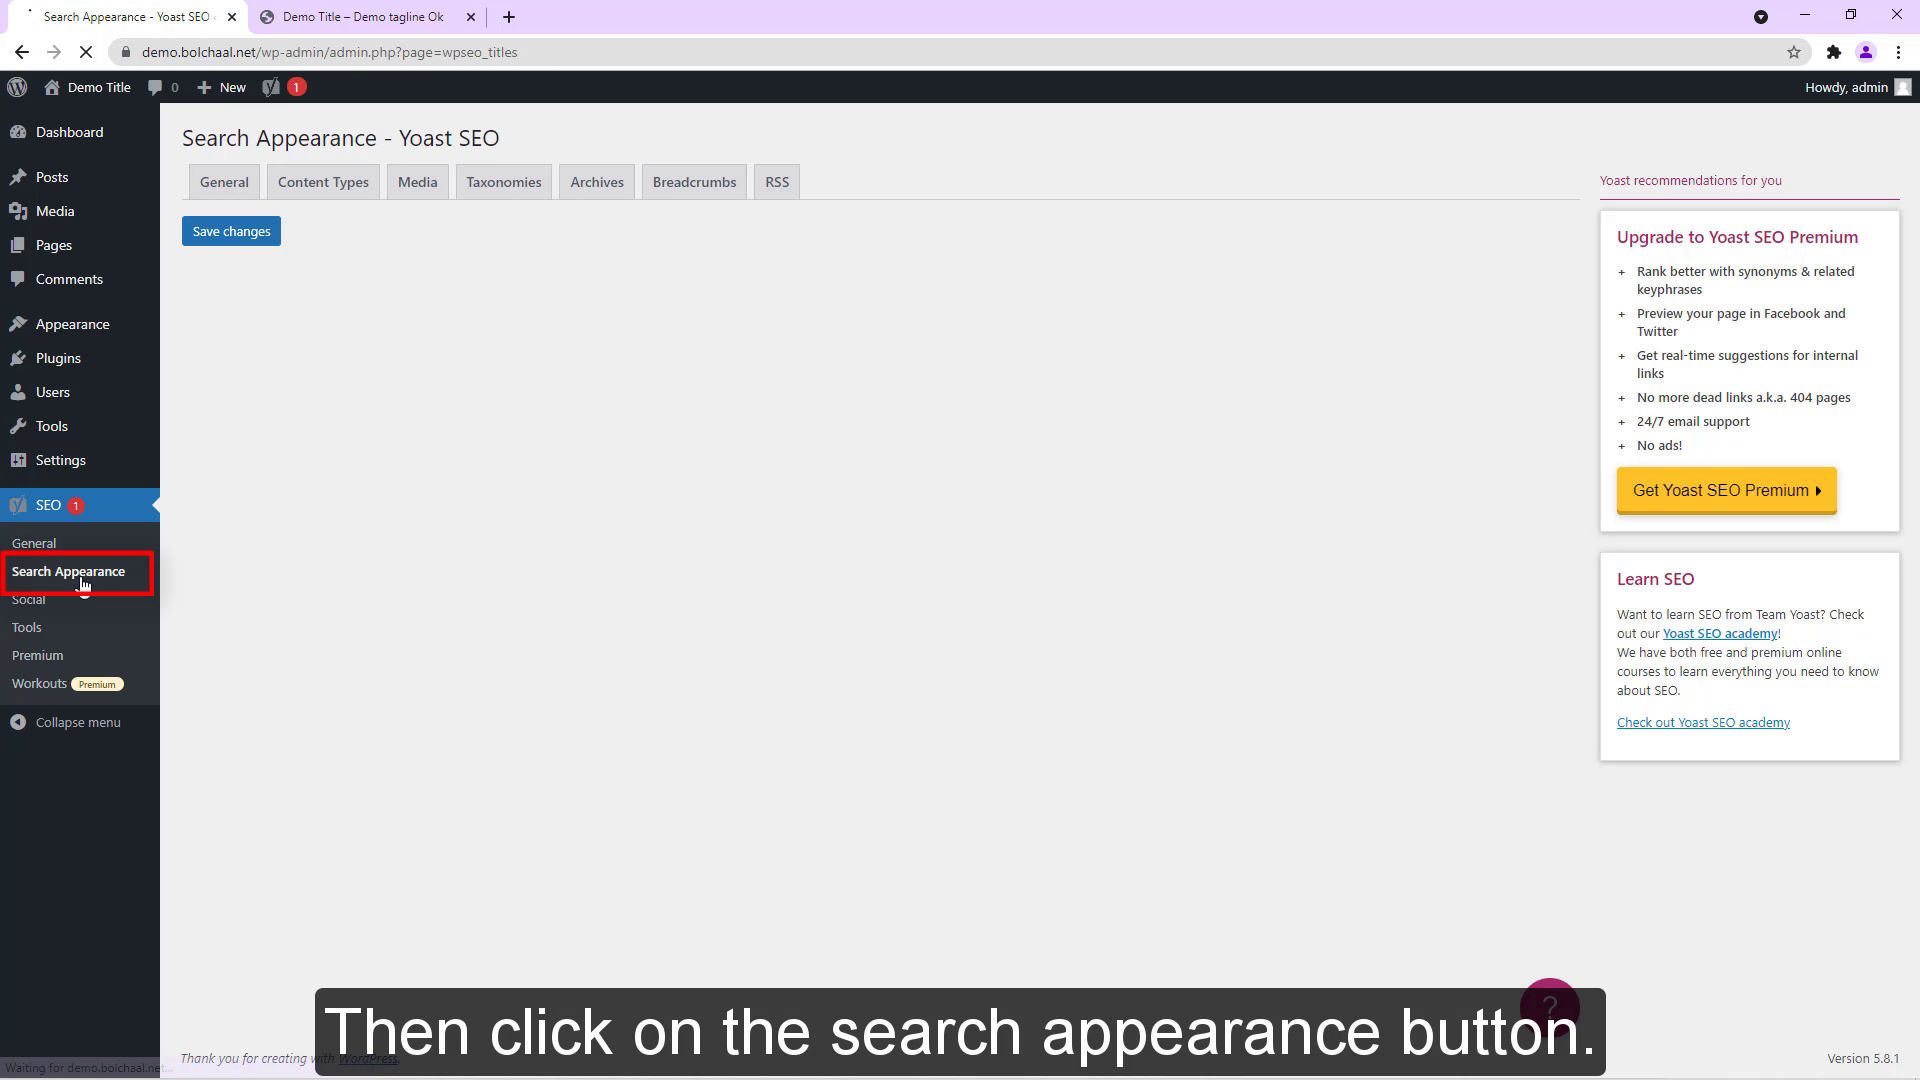 click on the search appearance button